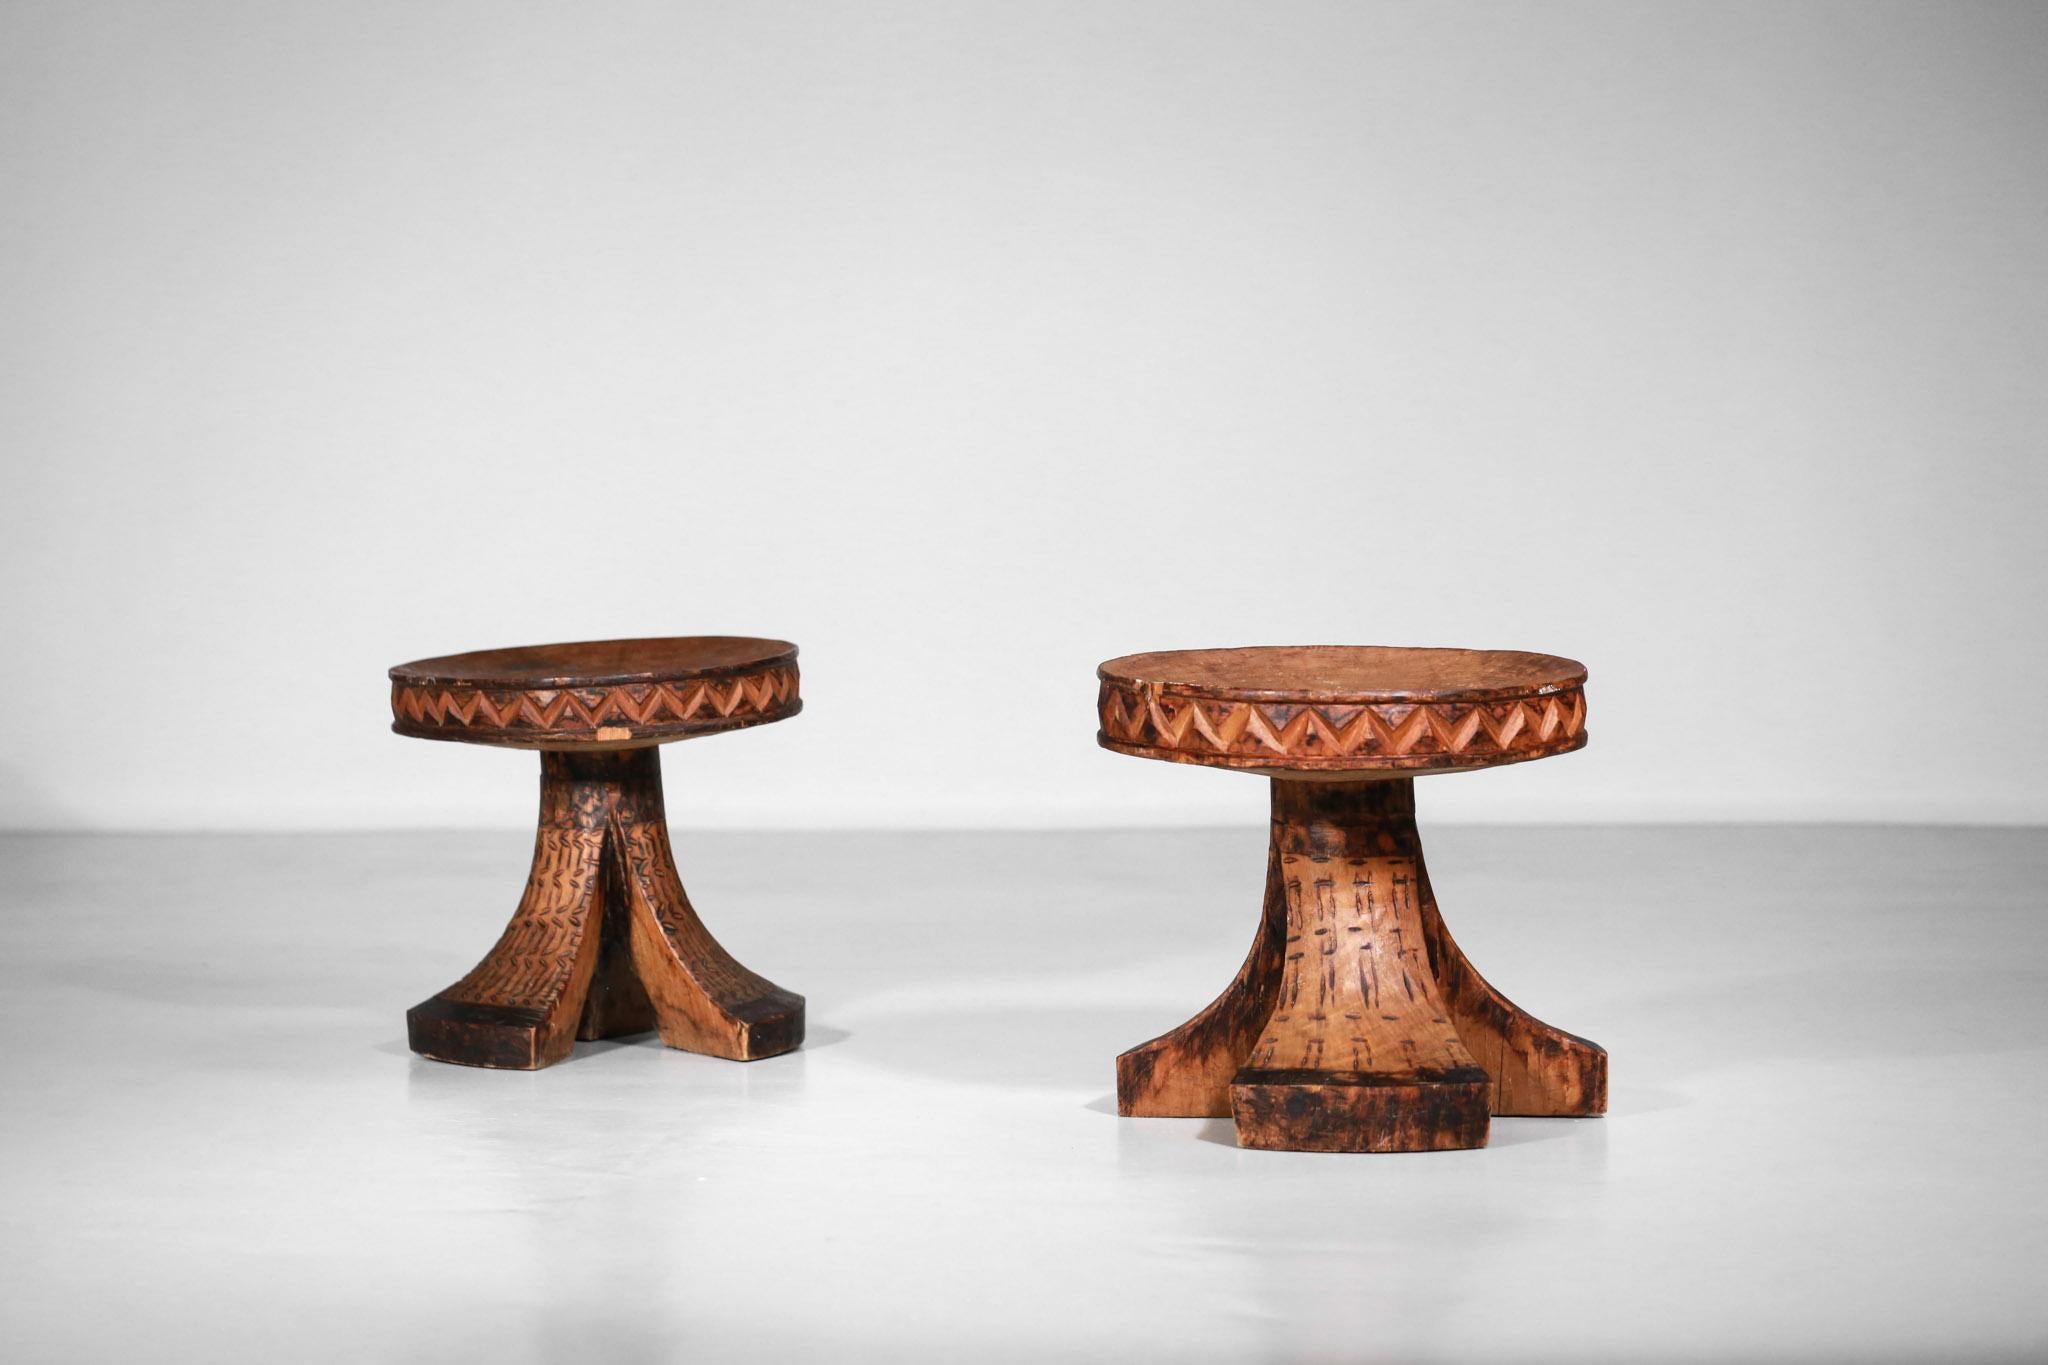 Duo of African solid wood stools carved from a single piece of wood.
Very decorative geometrical carvings on the legs and all around the seat.